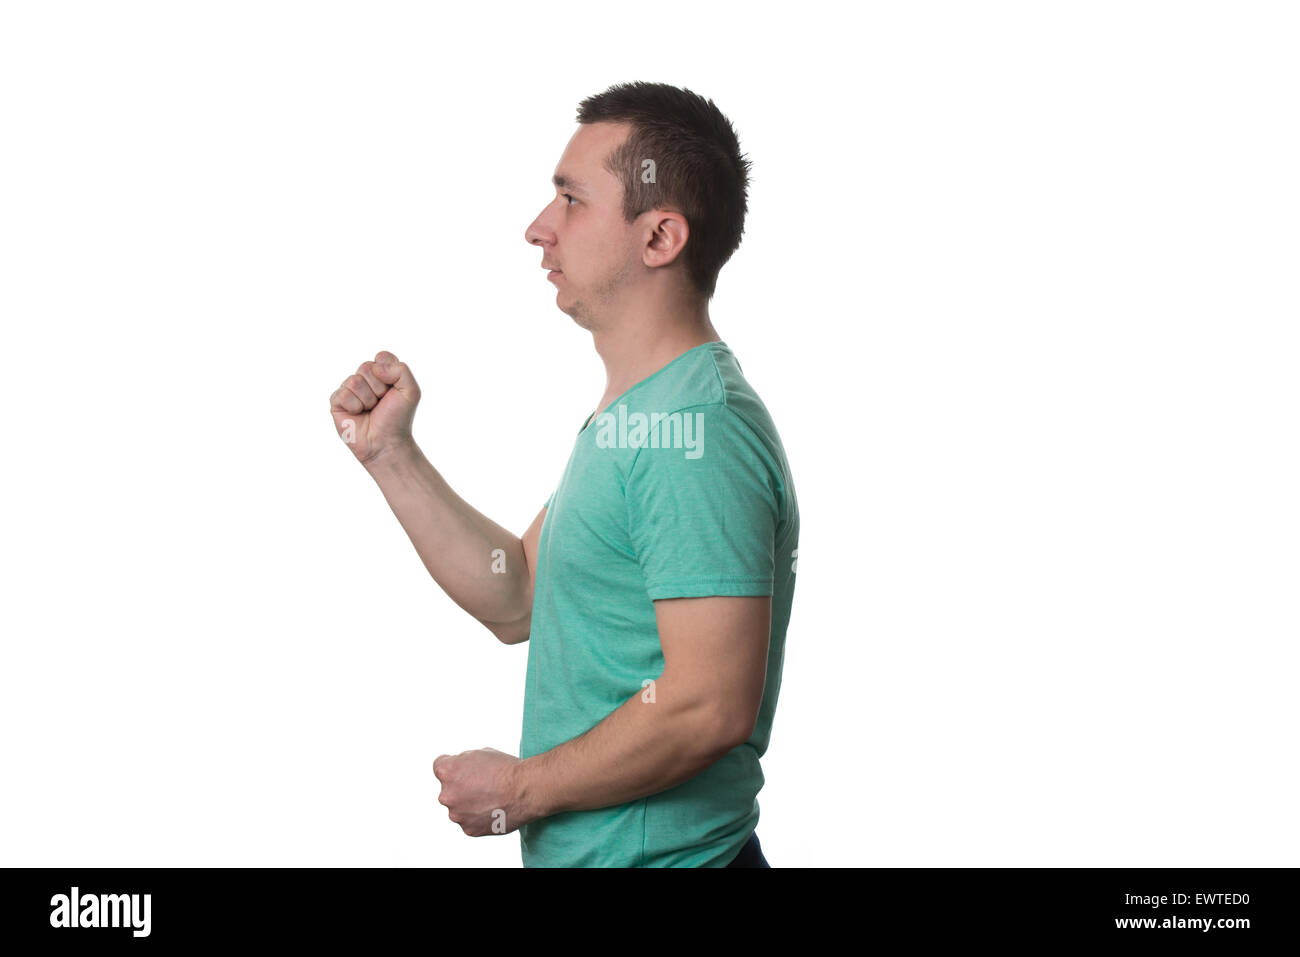 Portrait Of Angry Young Man Clenching His Fist - Isolated On White Background Stock Photo